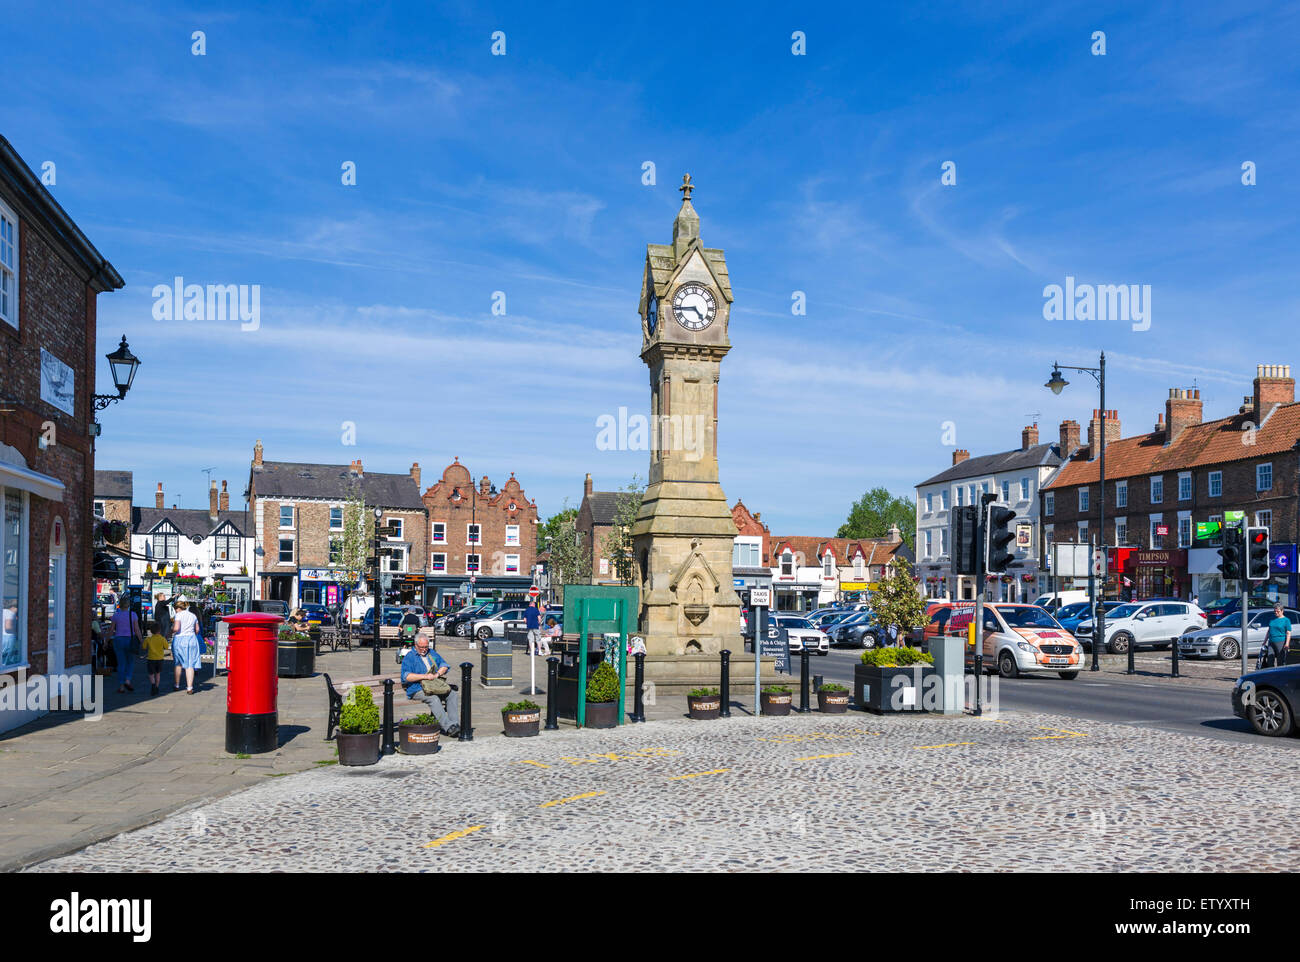 Clock Tower in the Market Place, Thirsk, North Yorkshire, England, UK Stock Photo